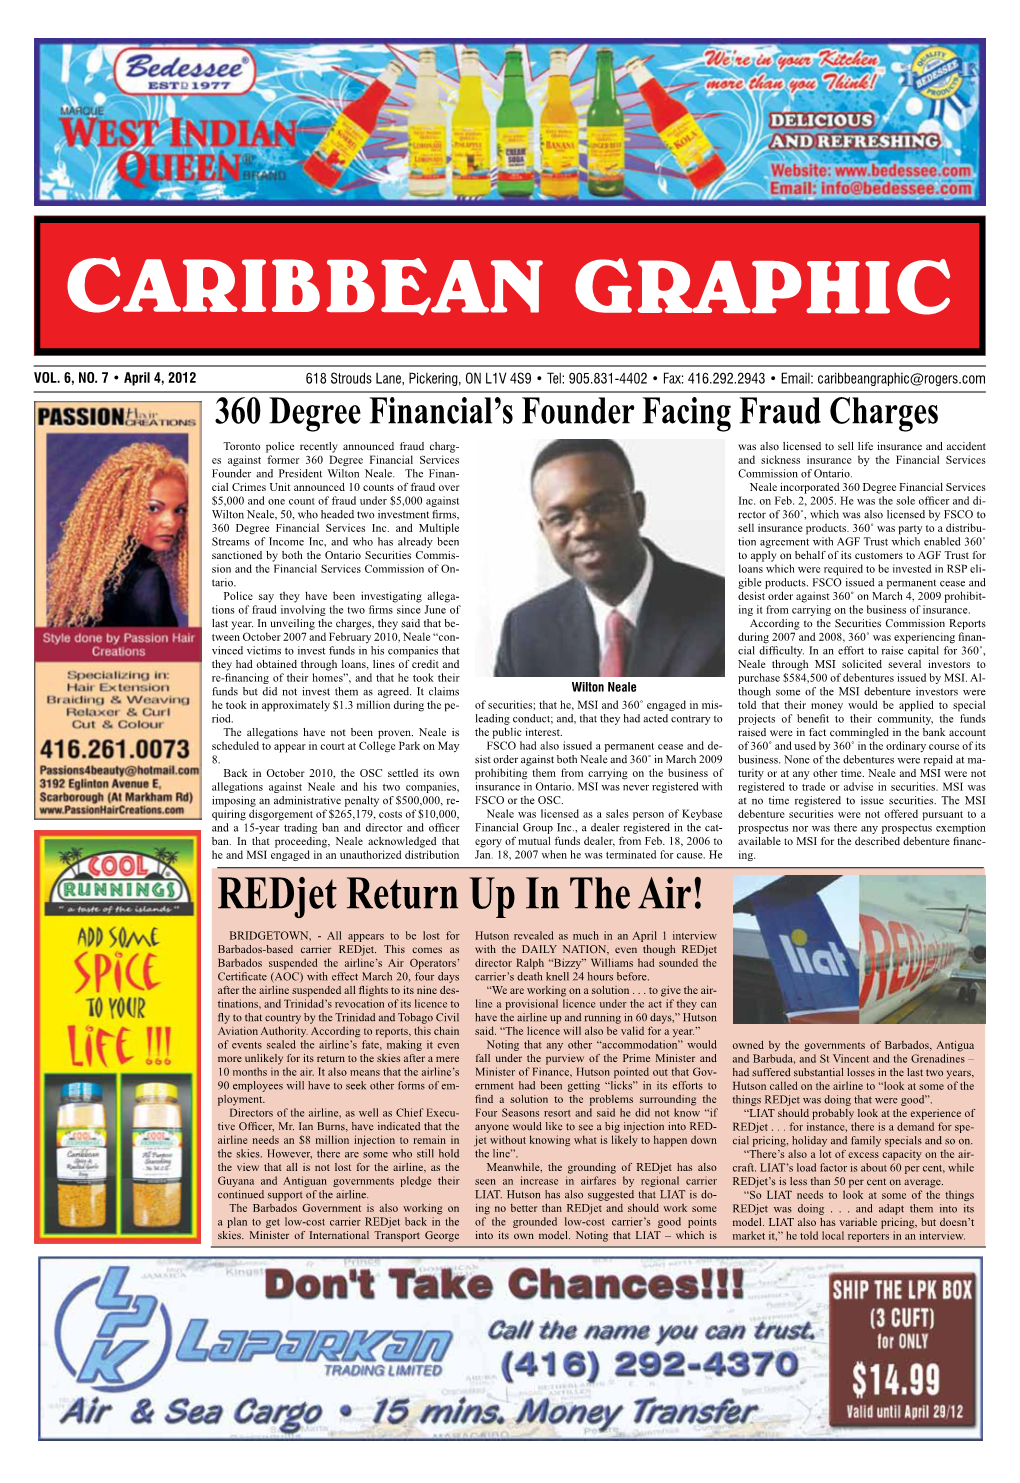 Redjet Return up in the Air! BRIDGETOWN, - All Appears to Be Lost for Hutson Revealed As Much in an April 1 Interview Barbados-Based Carrier Redjet